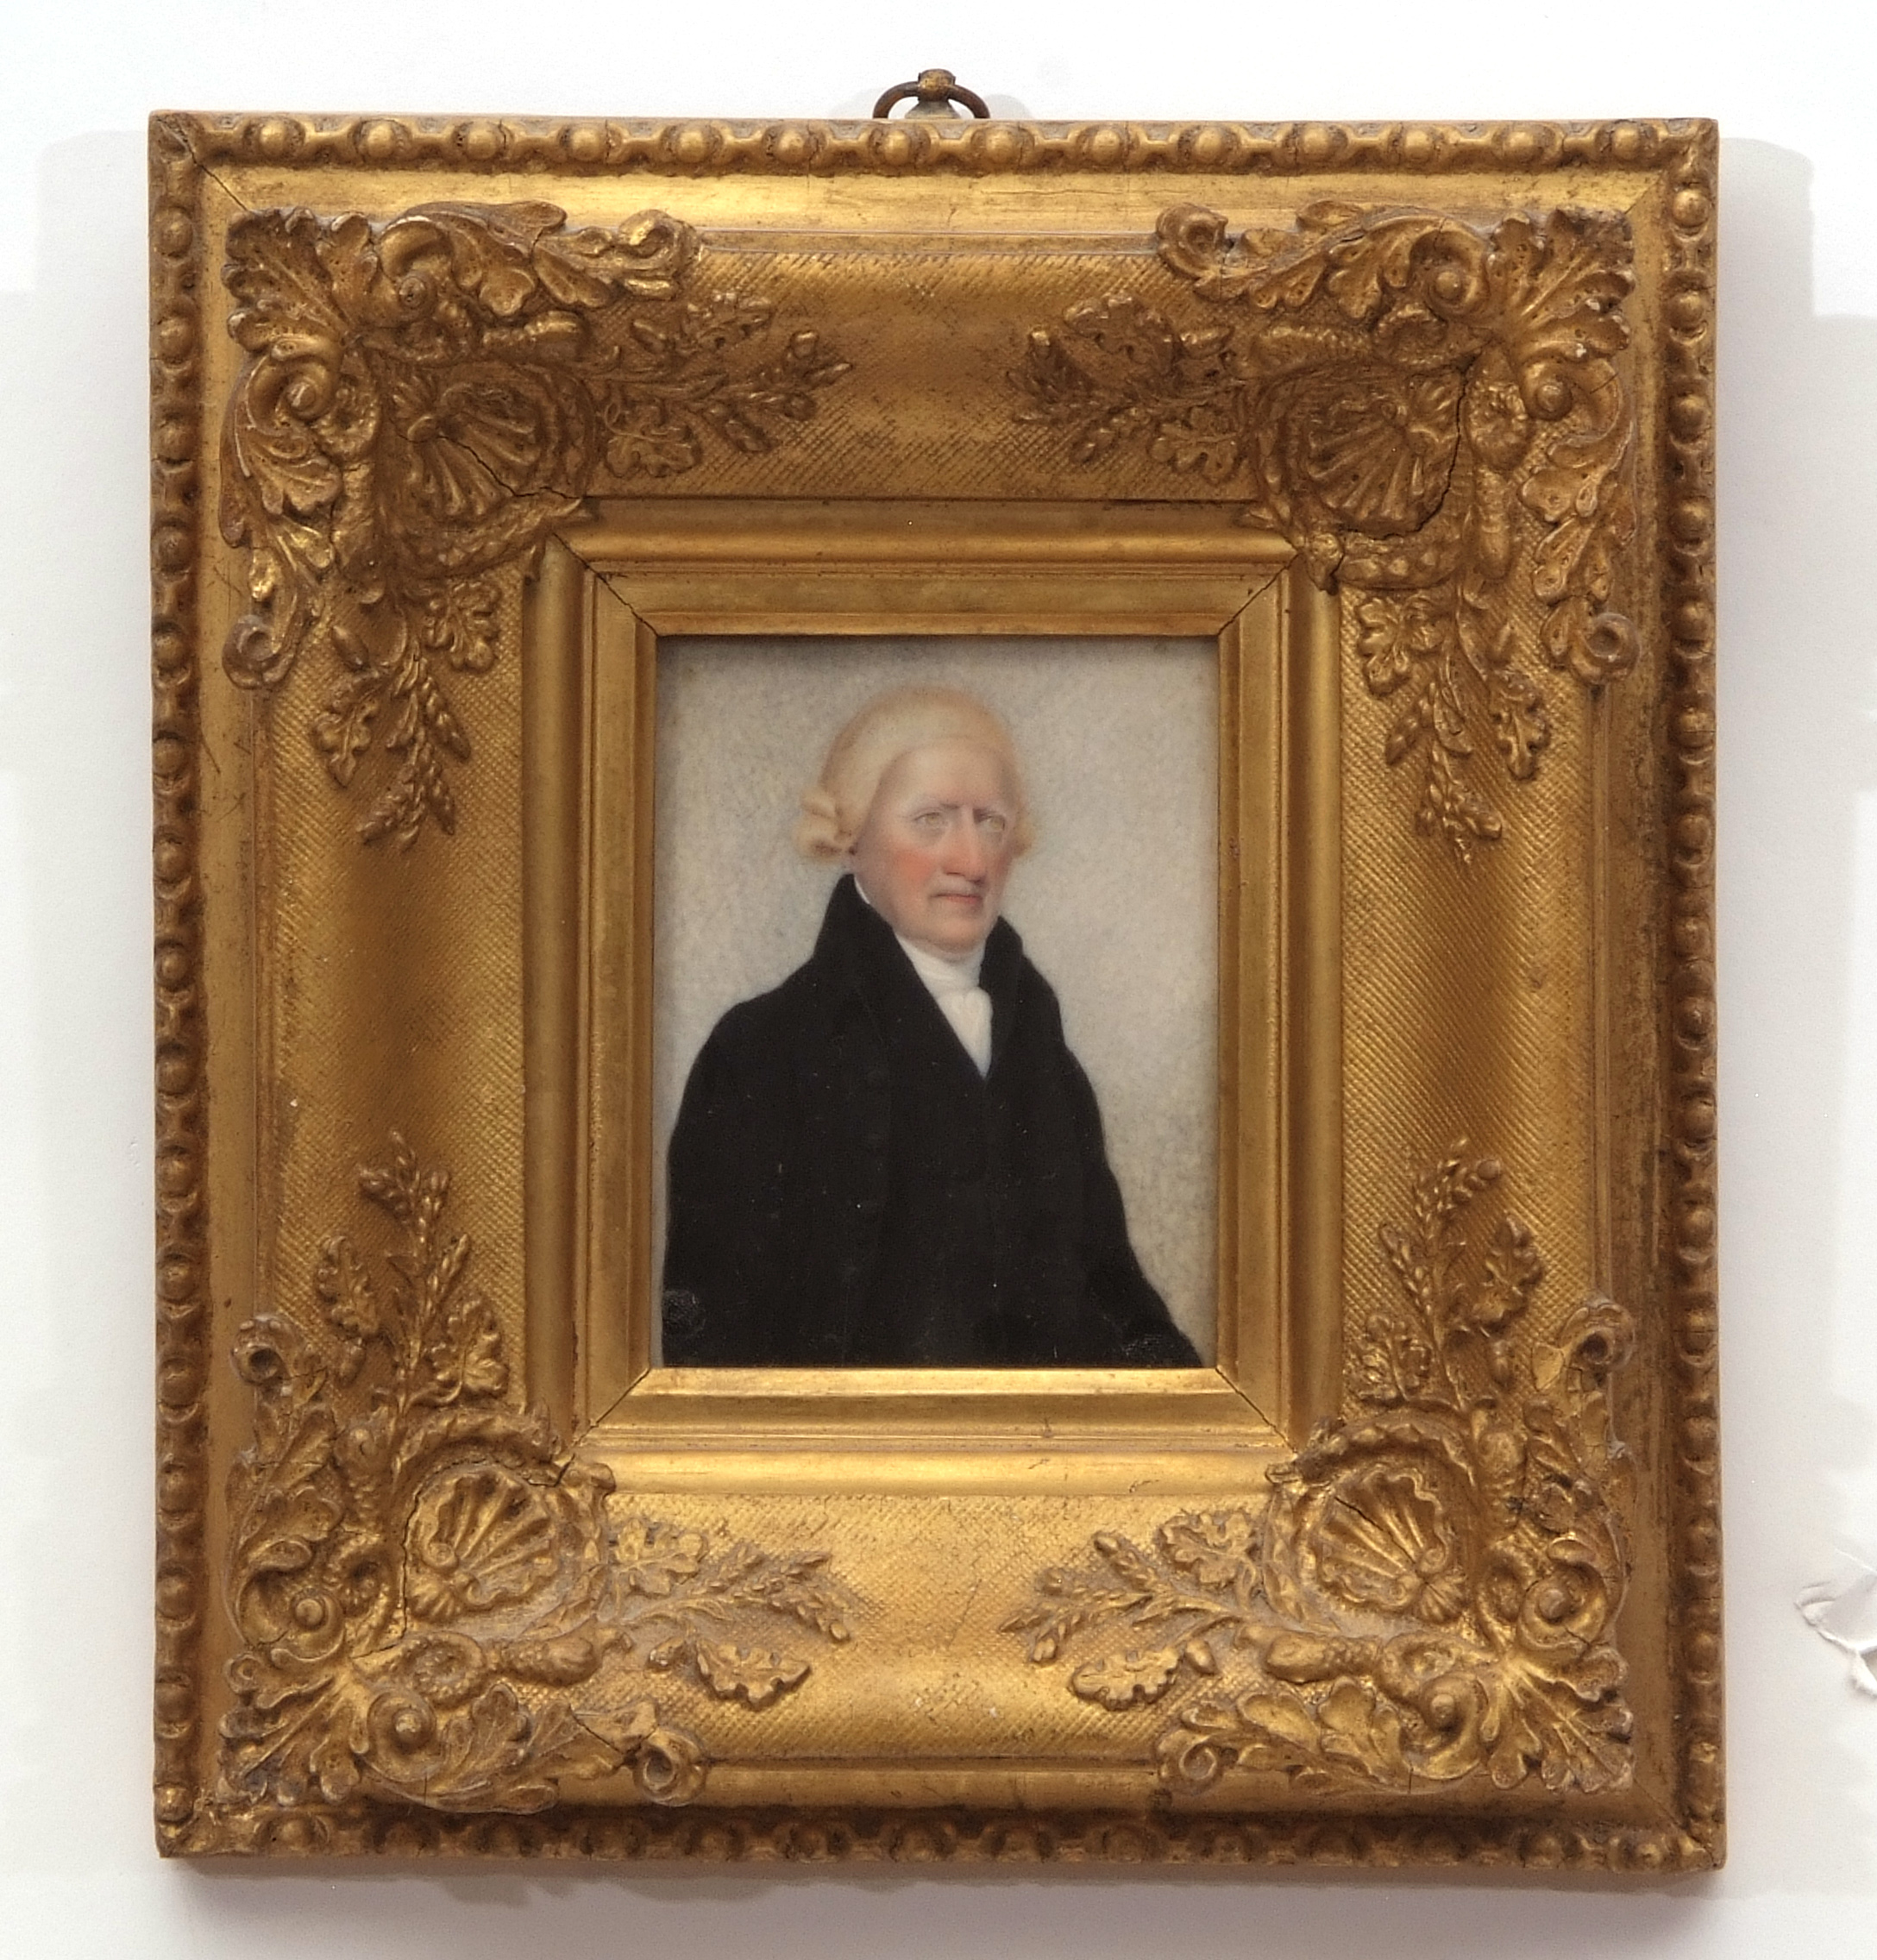 English School (18th/19th century), Portrait of John Buxton Esq and Philip Candler, pair of oils - Image 3 of 3